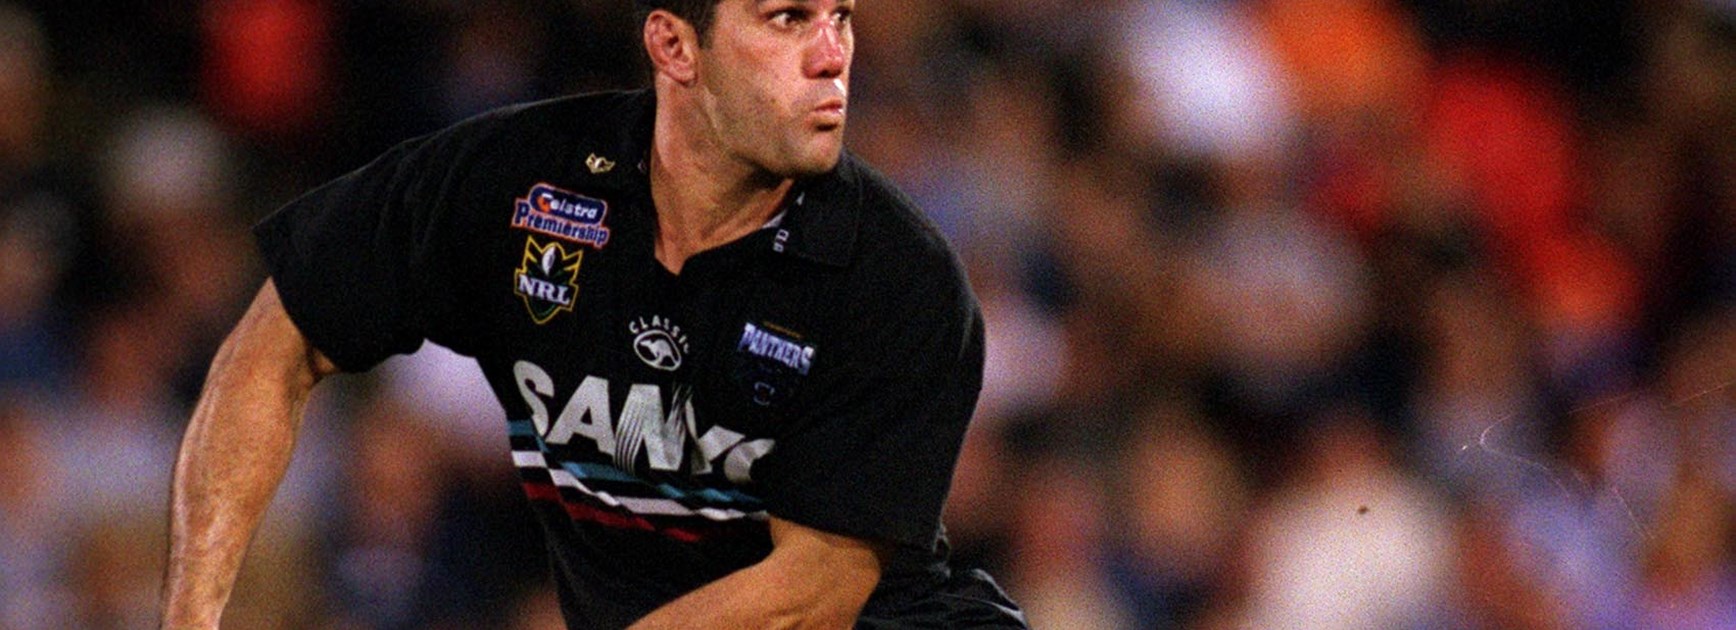 Foggy memories: The last ‘hooker’ before Cameron Smith